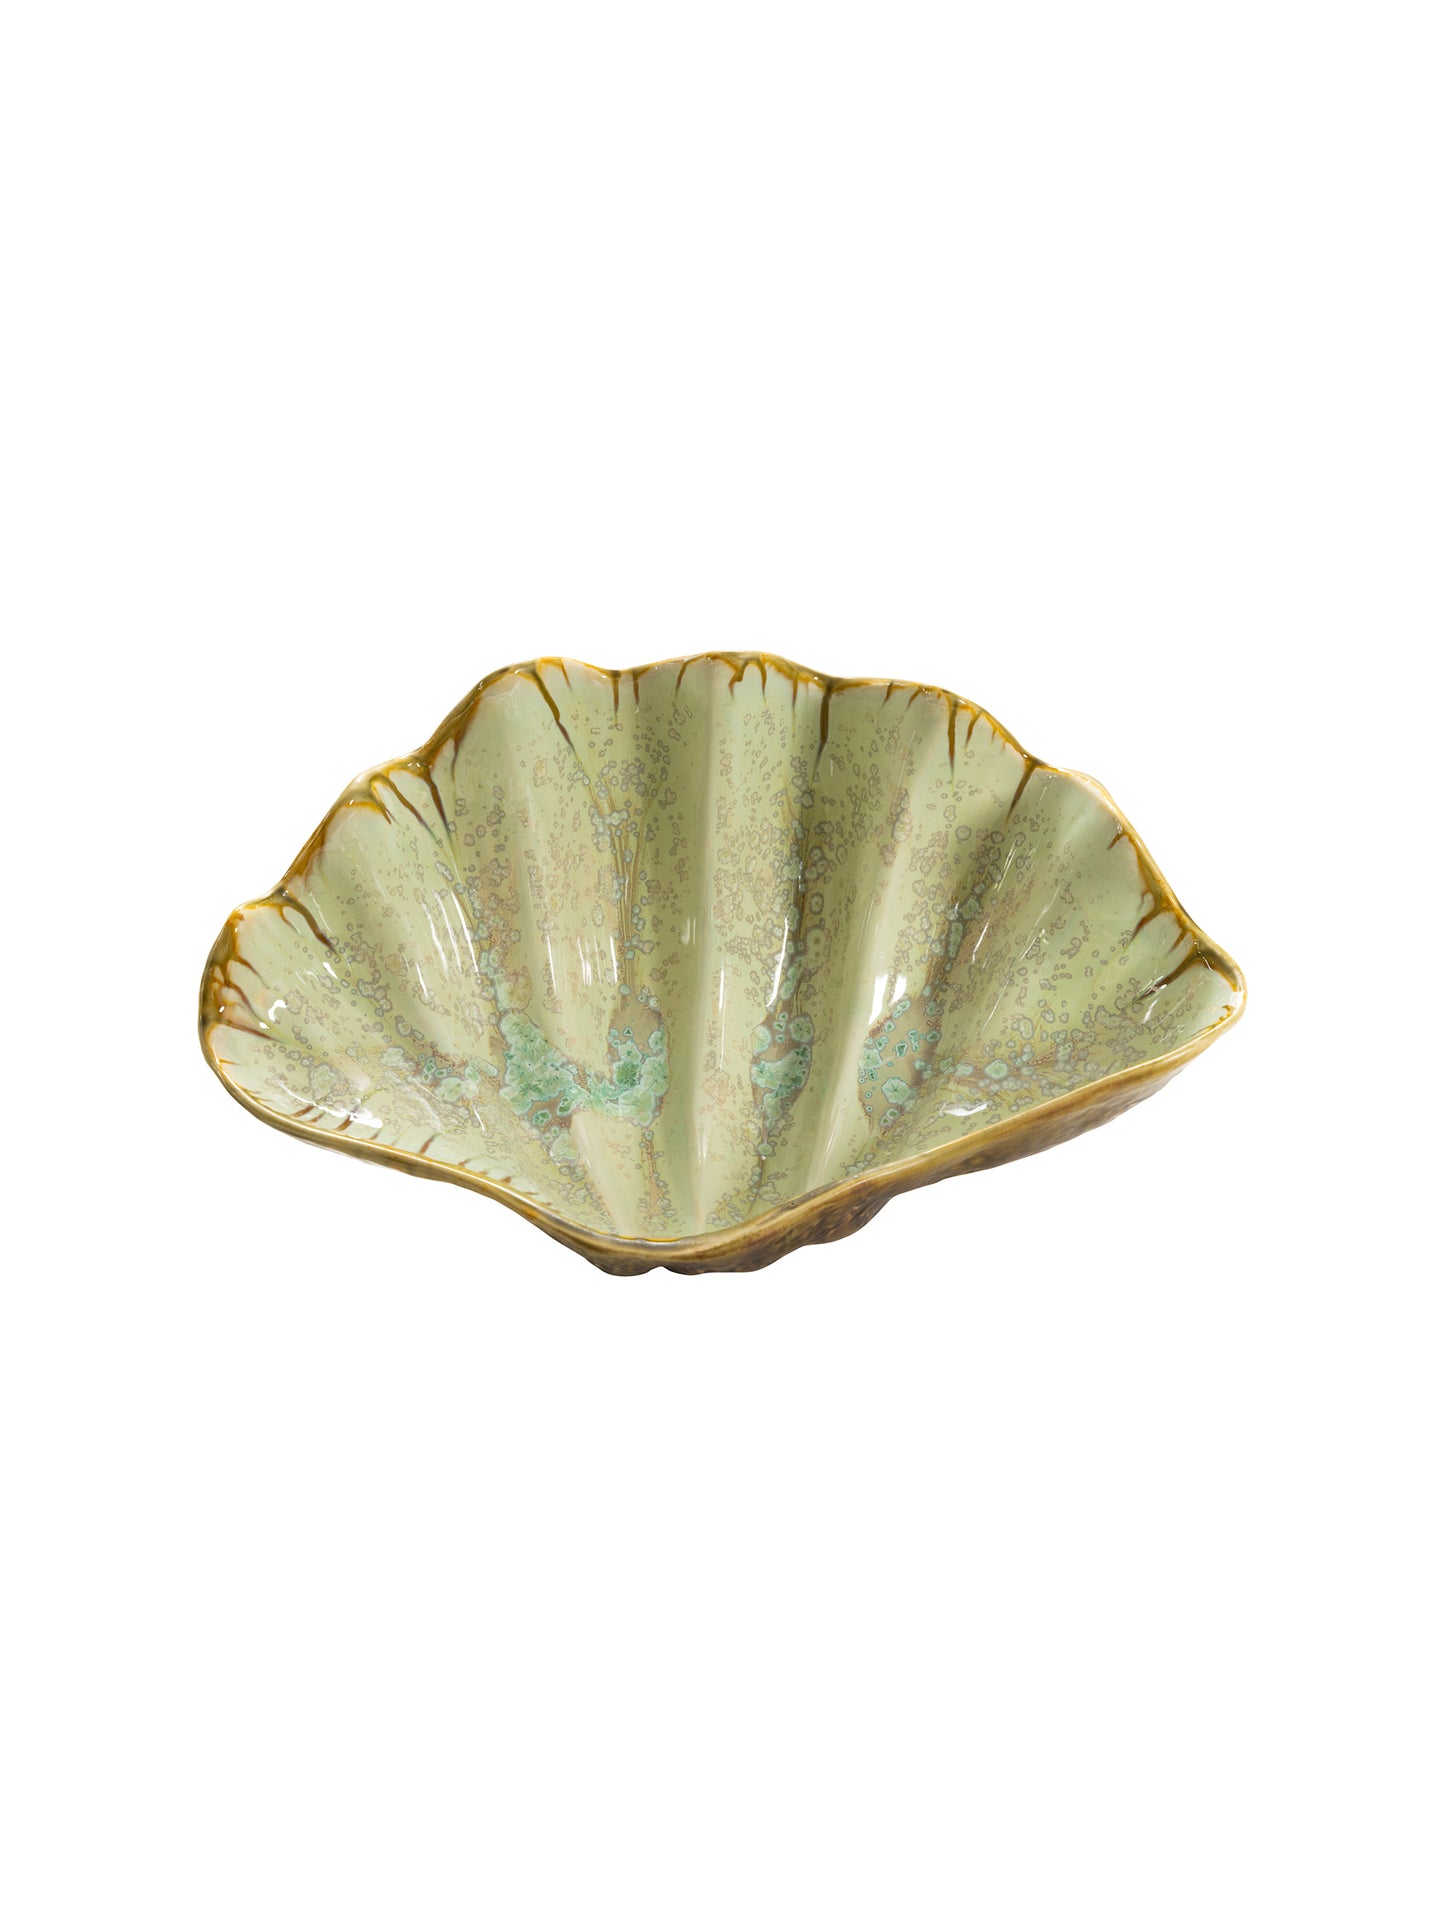 Tortoise and Mint Sea Clam Bowl Weston Table